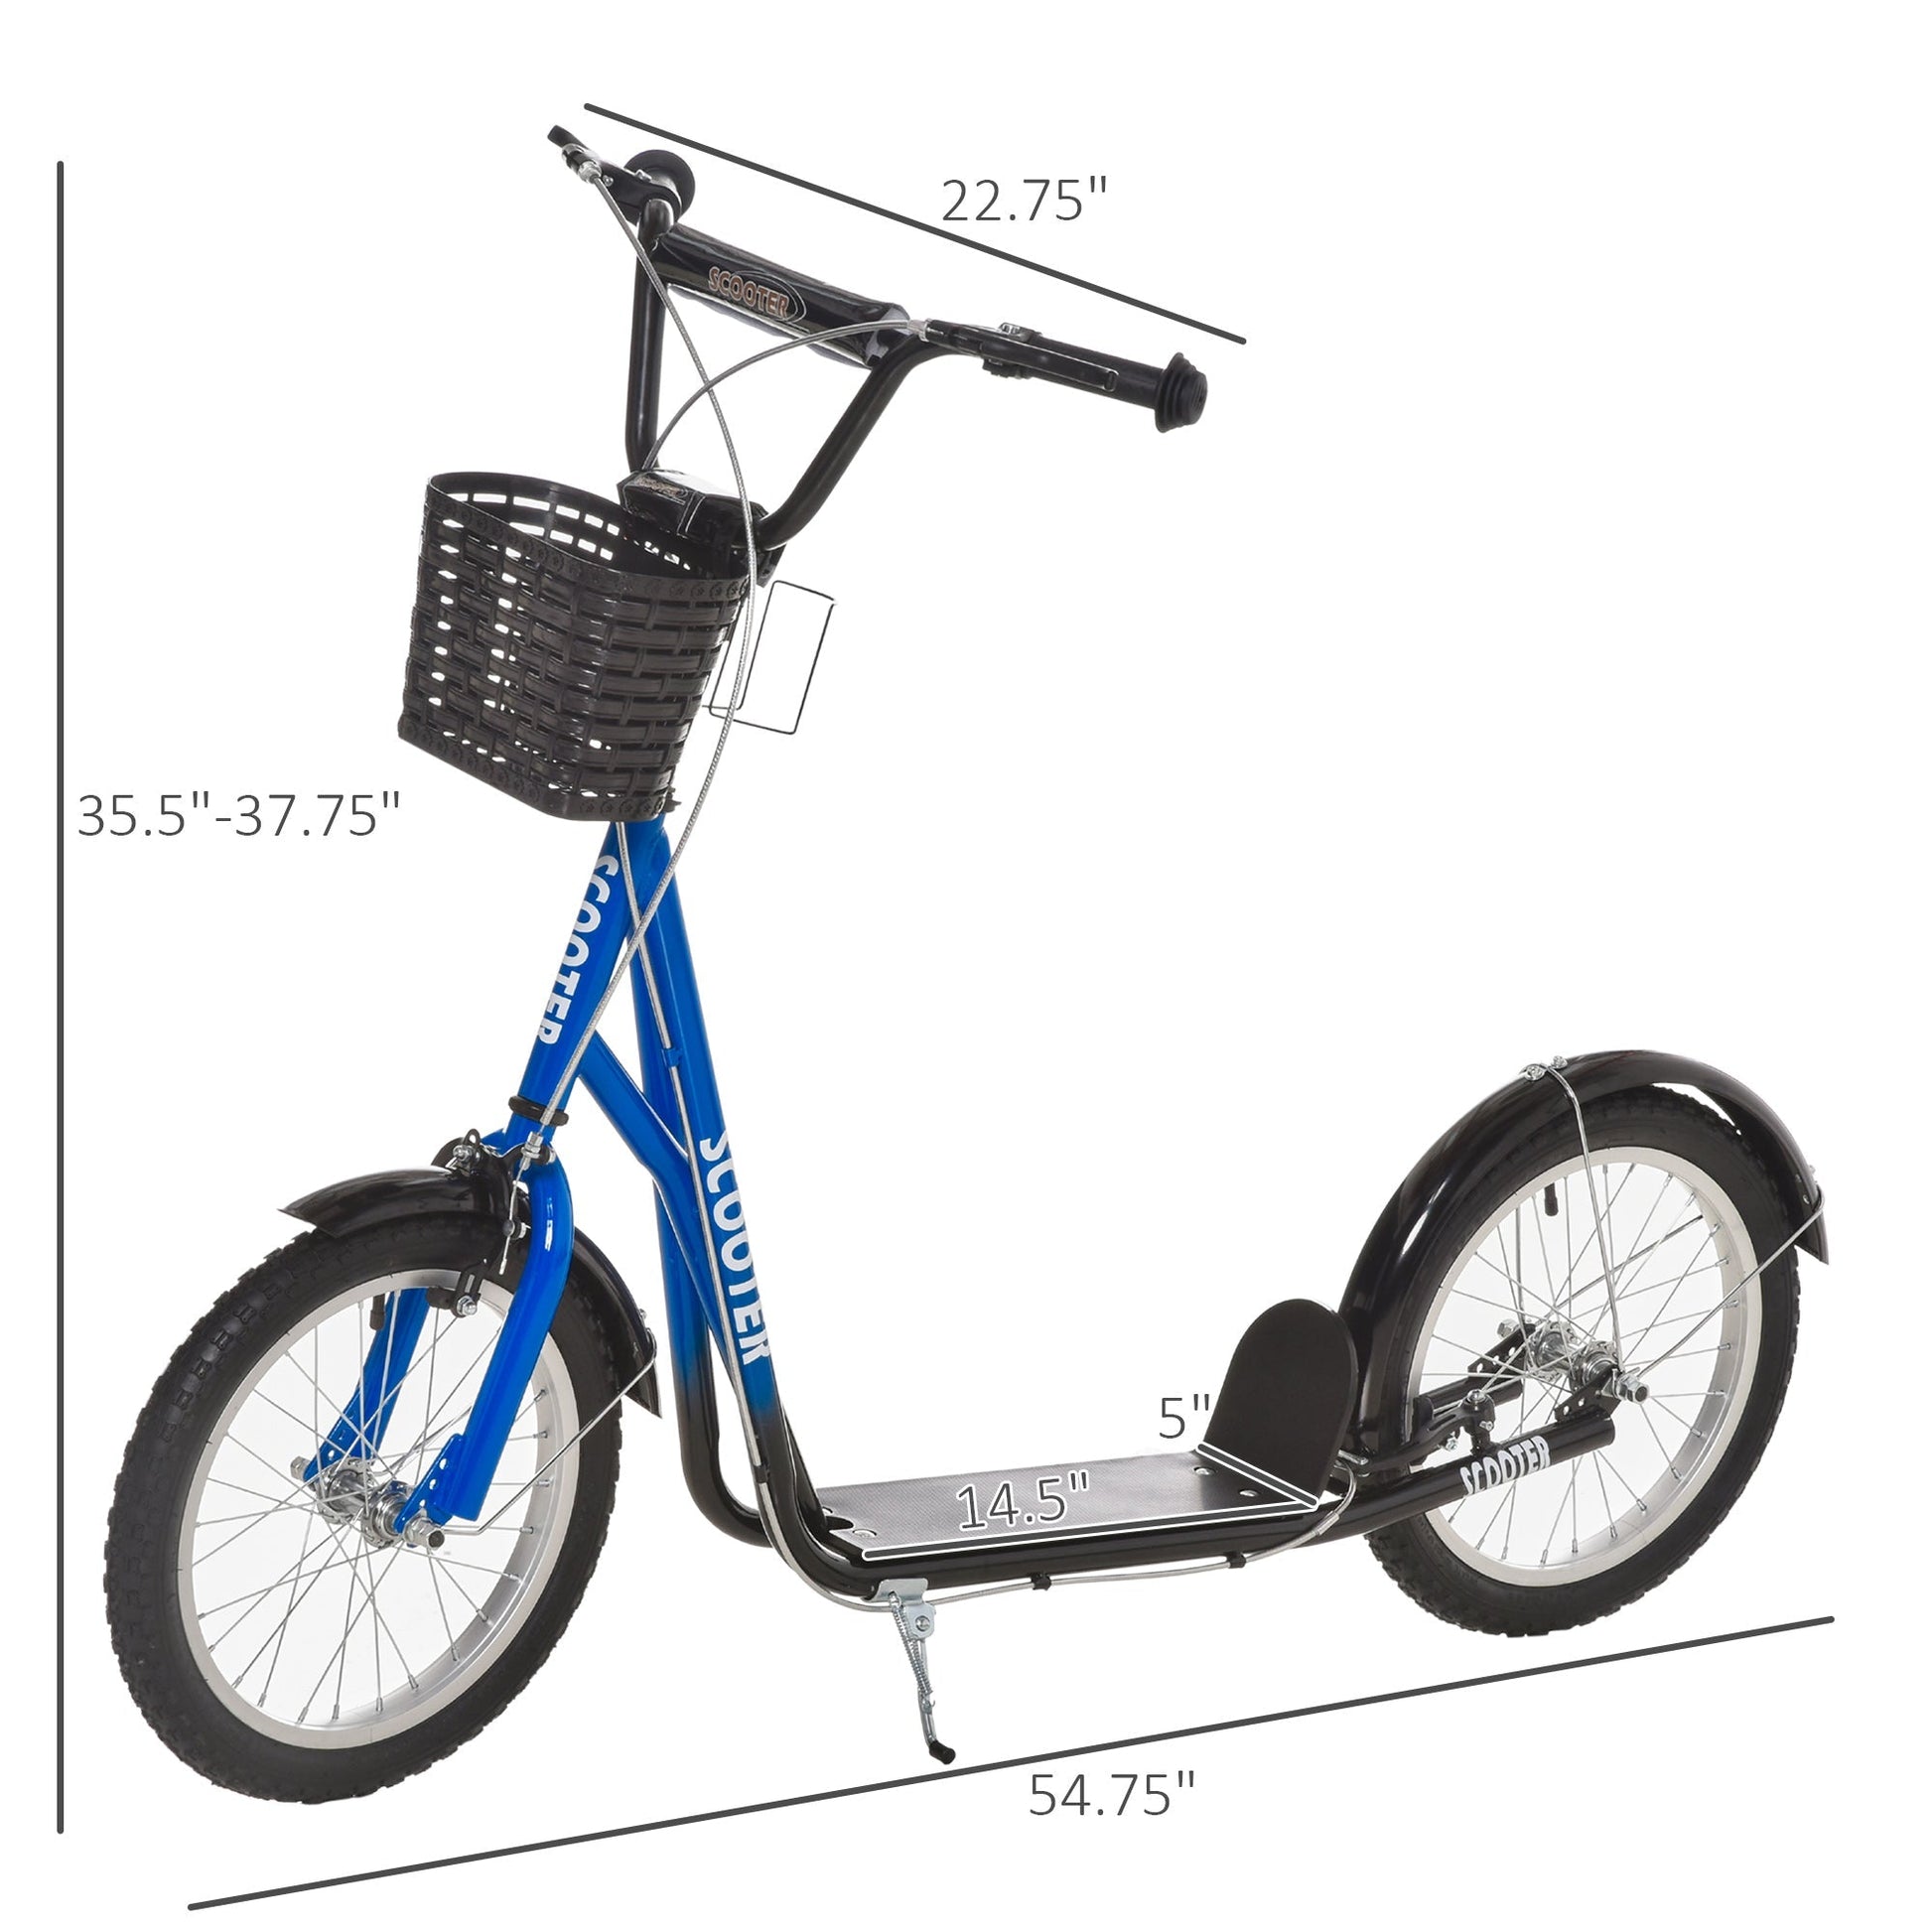 Kick Scooter for kids Teen Ride On Children Scooter with Adjustable Handlebar 2 Brakes Basket Cupholder Mudguard 16" Inflatable Rubber Tyres Blue at Gallery Canada